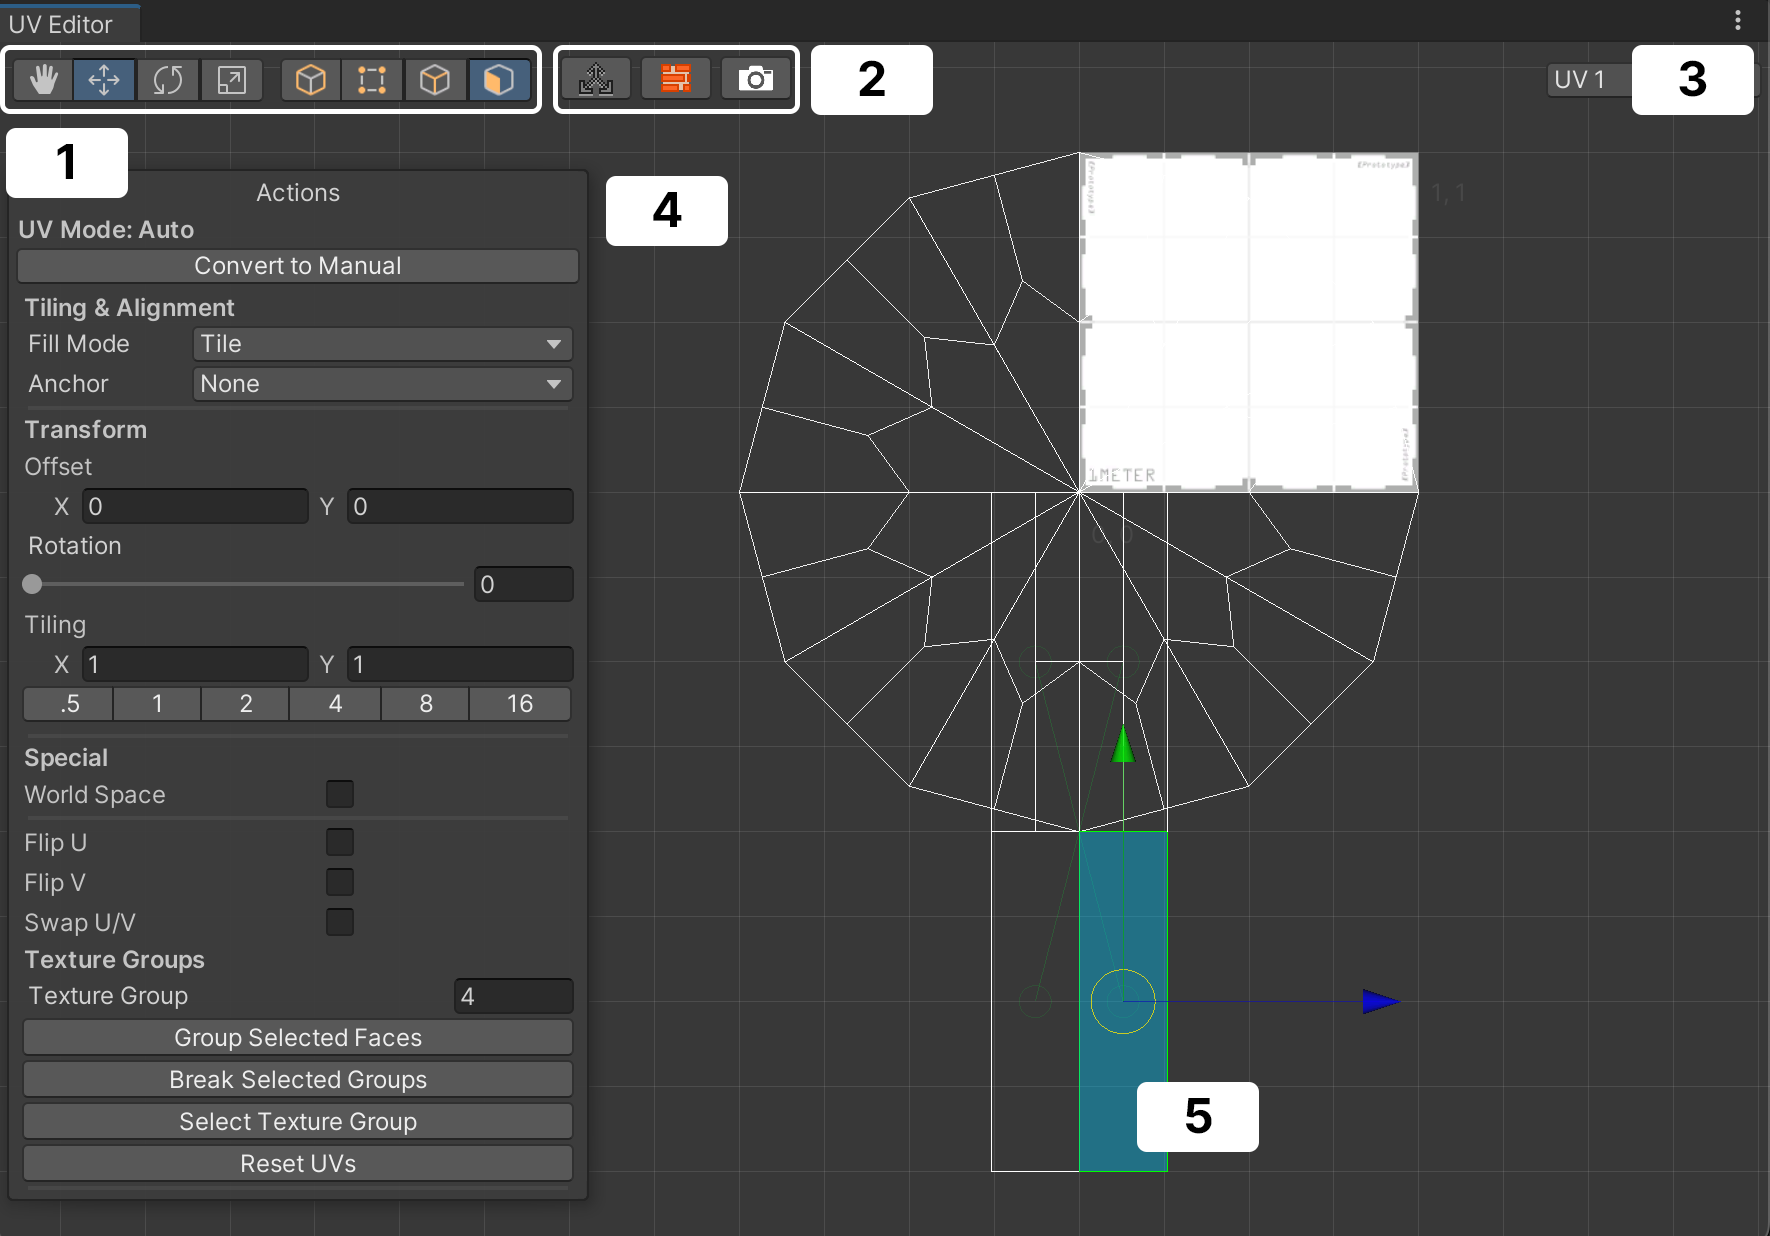 This is the UV Editor window for a cylindrical shaped object and the default UV mapping.